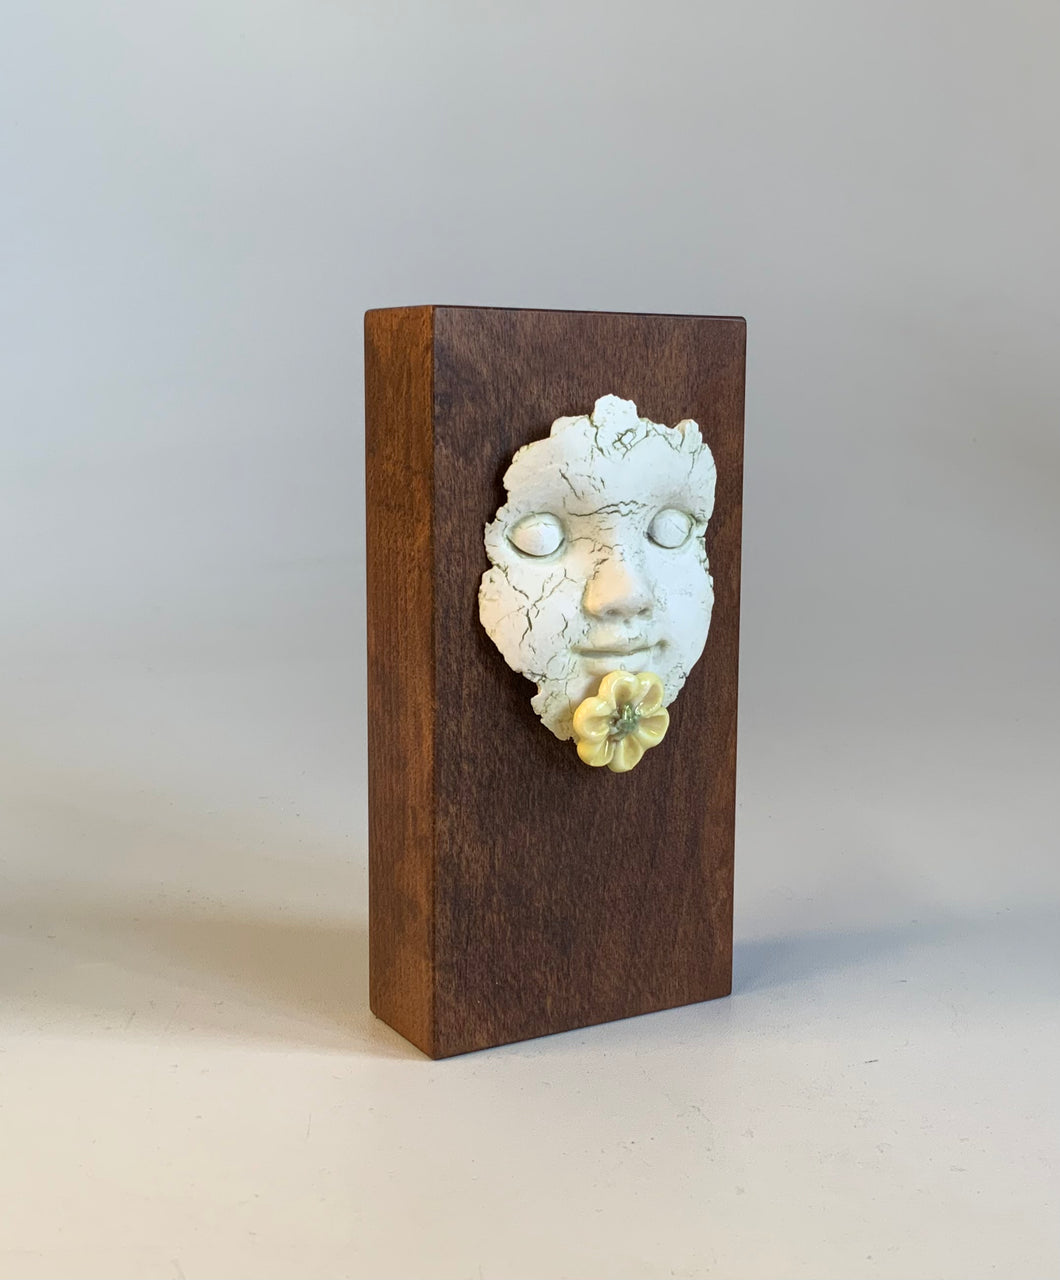 Block head doll face with yellow flower